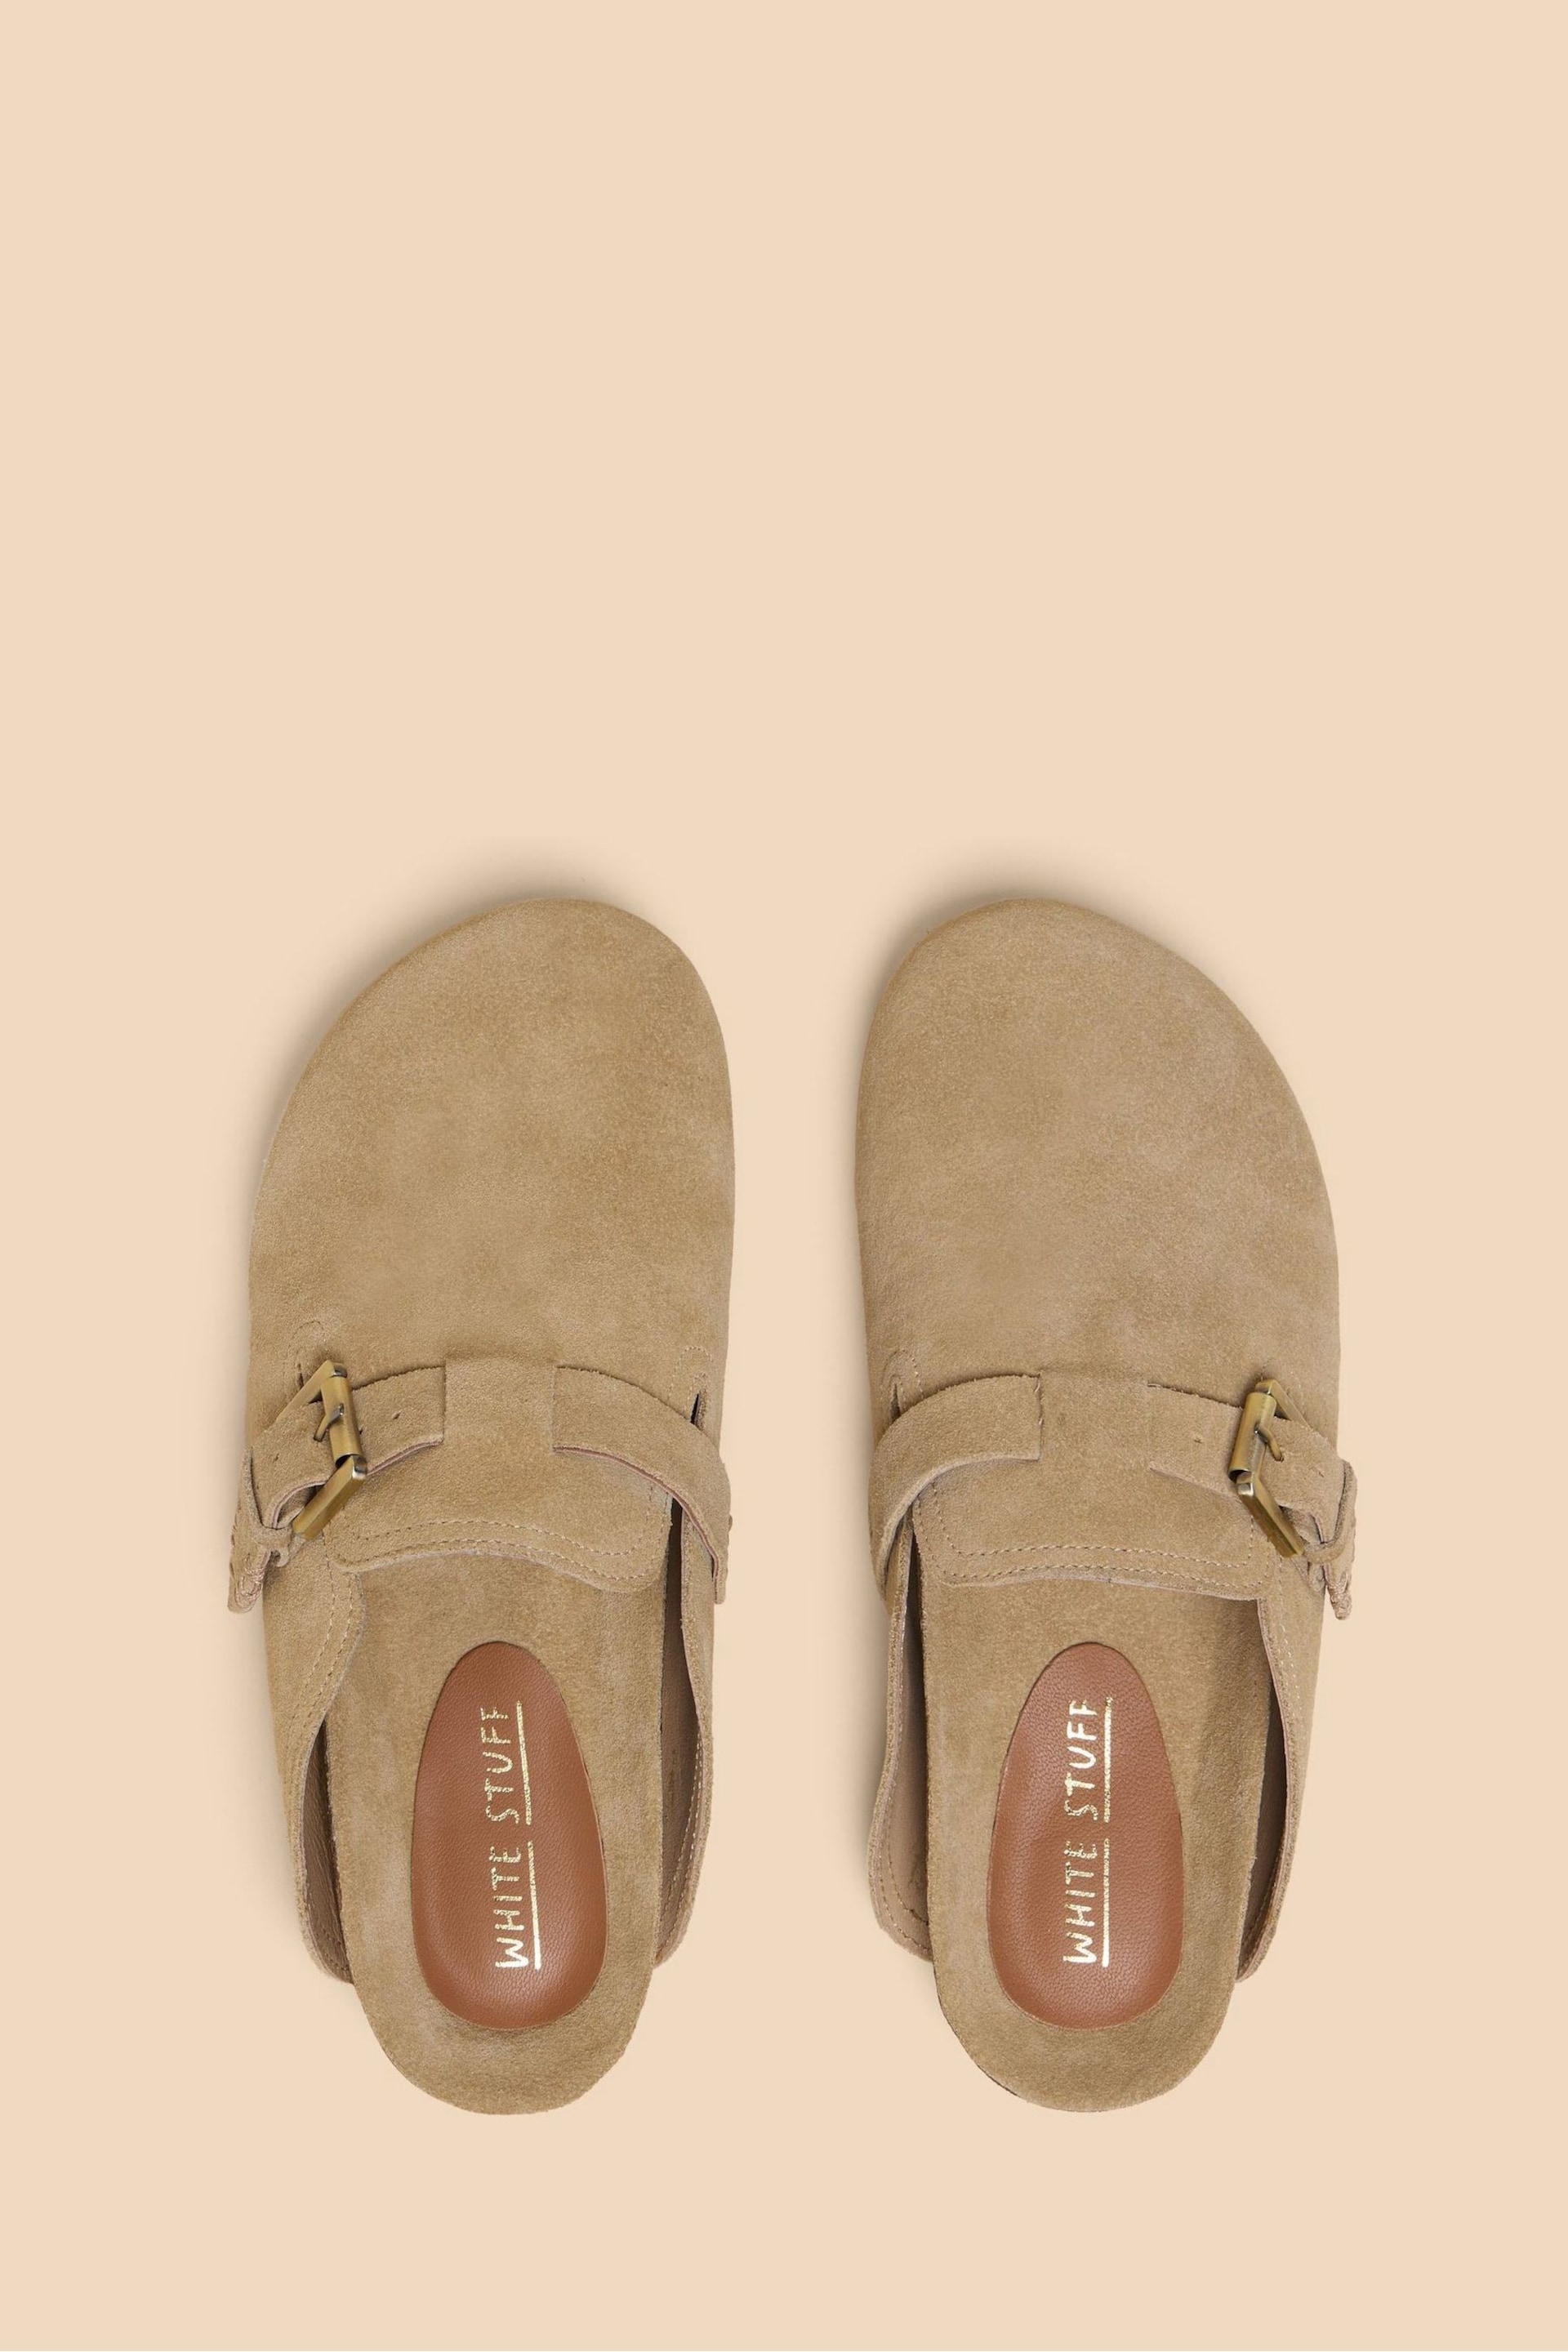 White Stuff Brown Myrtle Suede Slip On Mules - Image 3 of 4